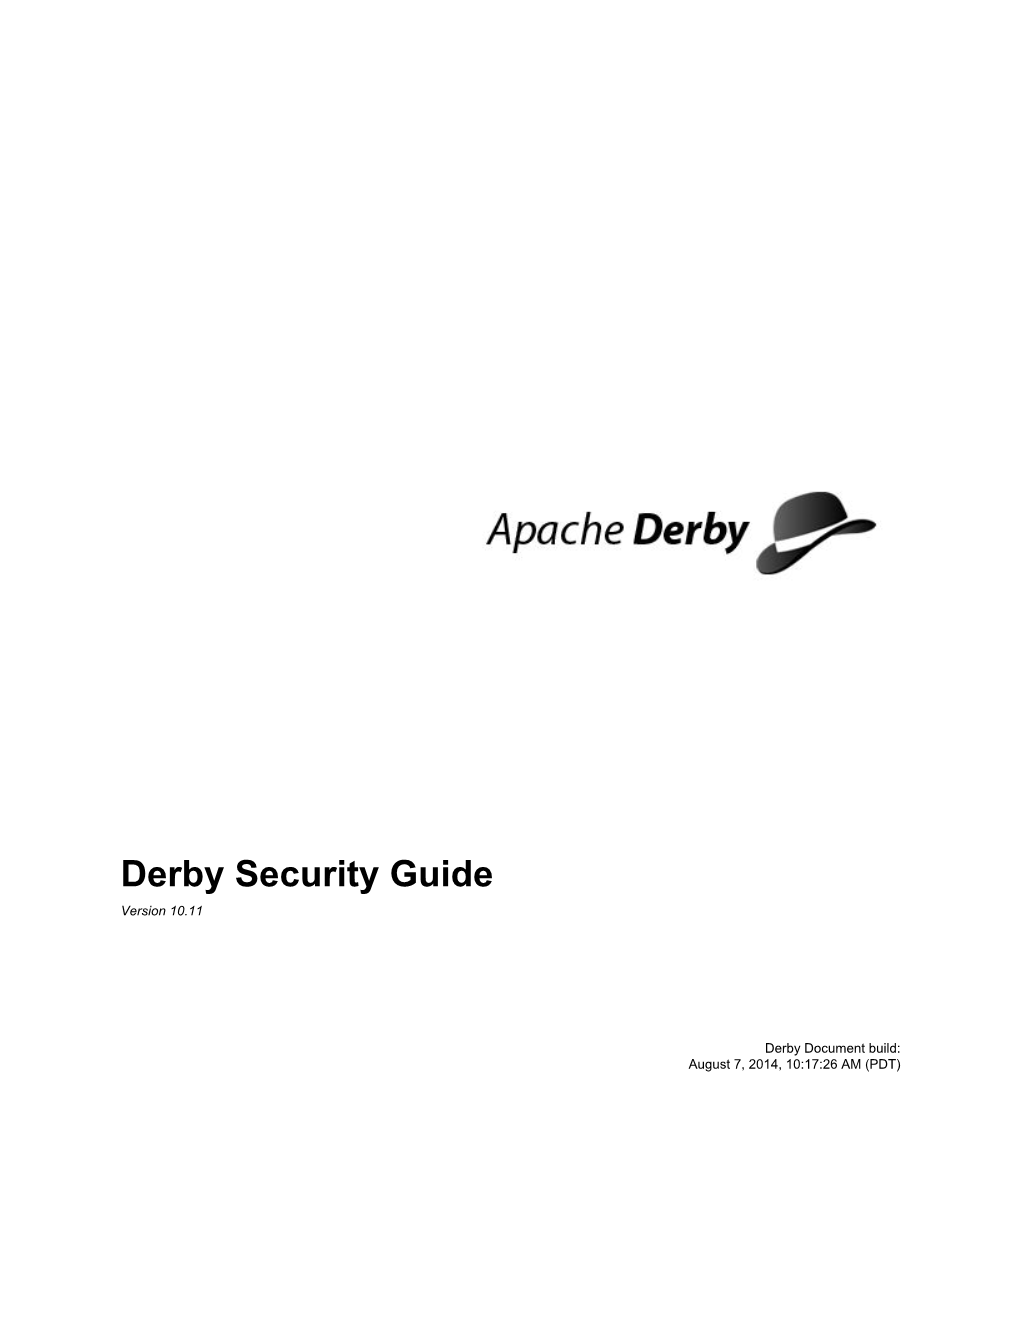 Derby Security Guide Version 10.11